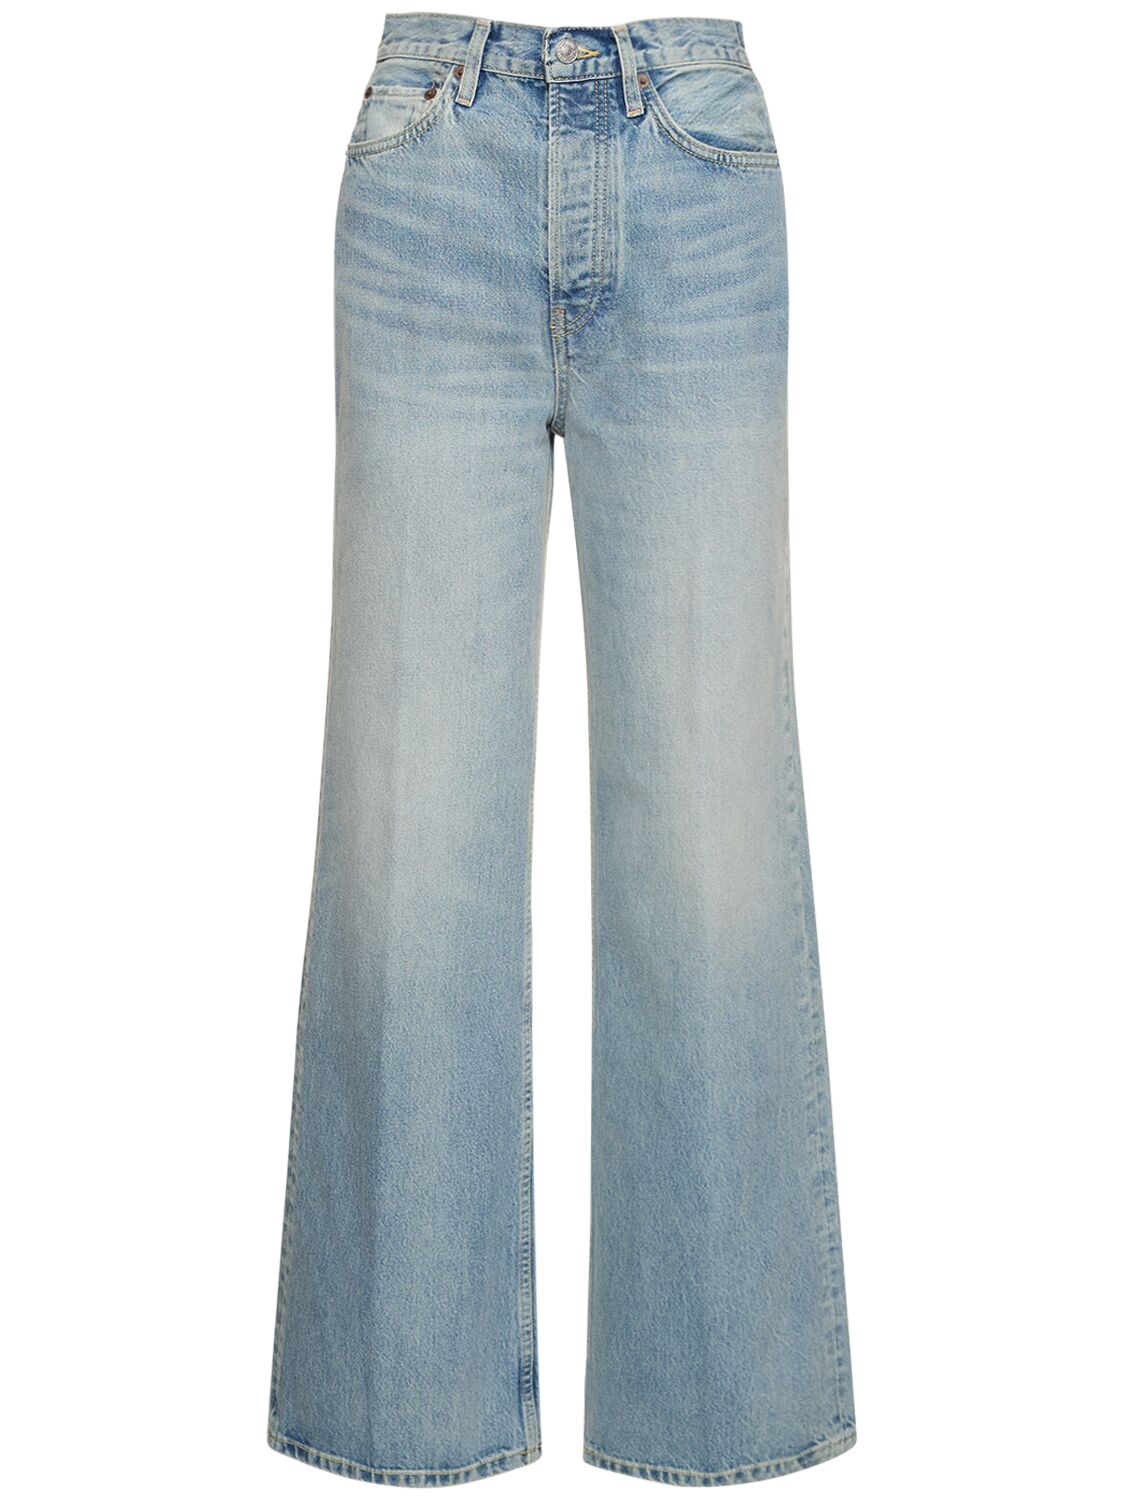 70's High Waisted Cotton Wide Leg Jeans